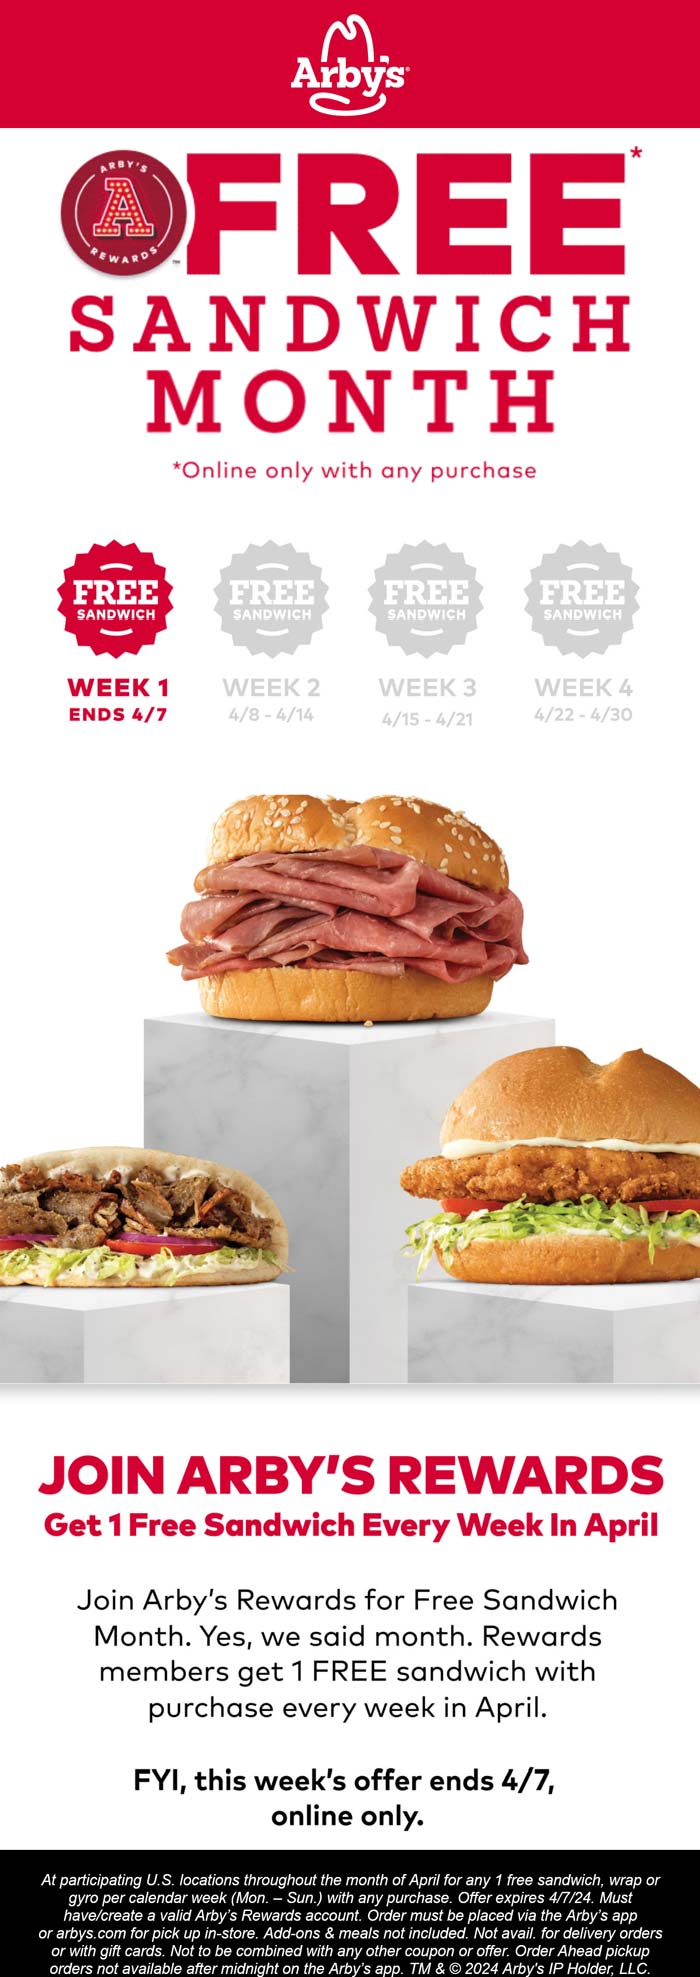 Arbys restaurants Coupon  Free sandwich weekly via login at Arbys restaurants #arbys 